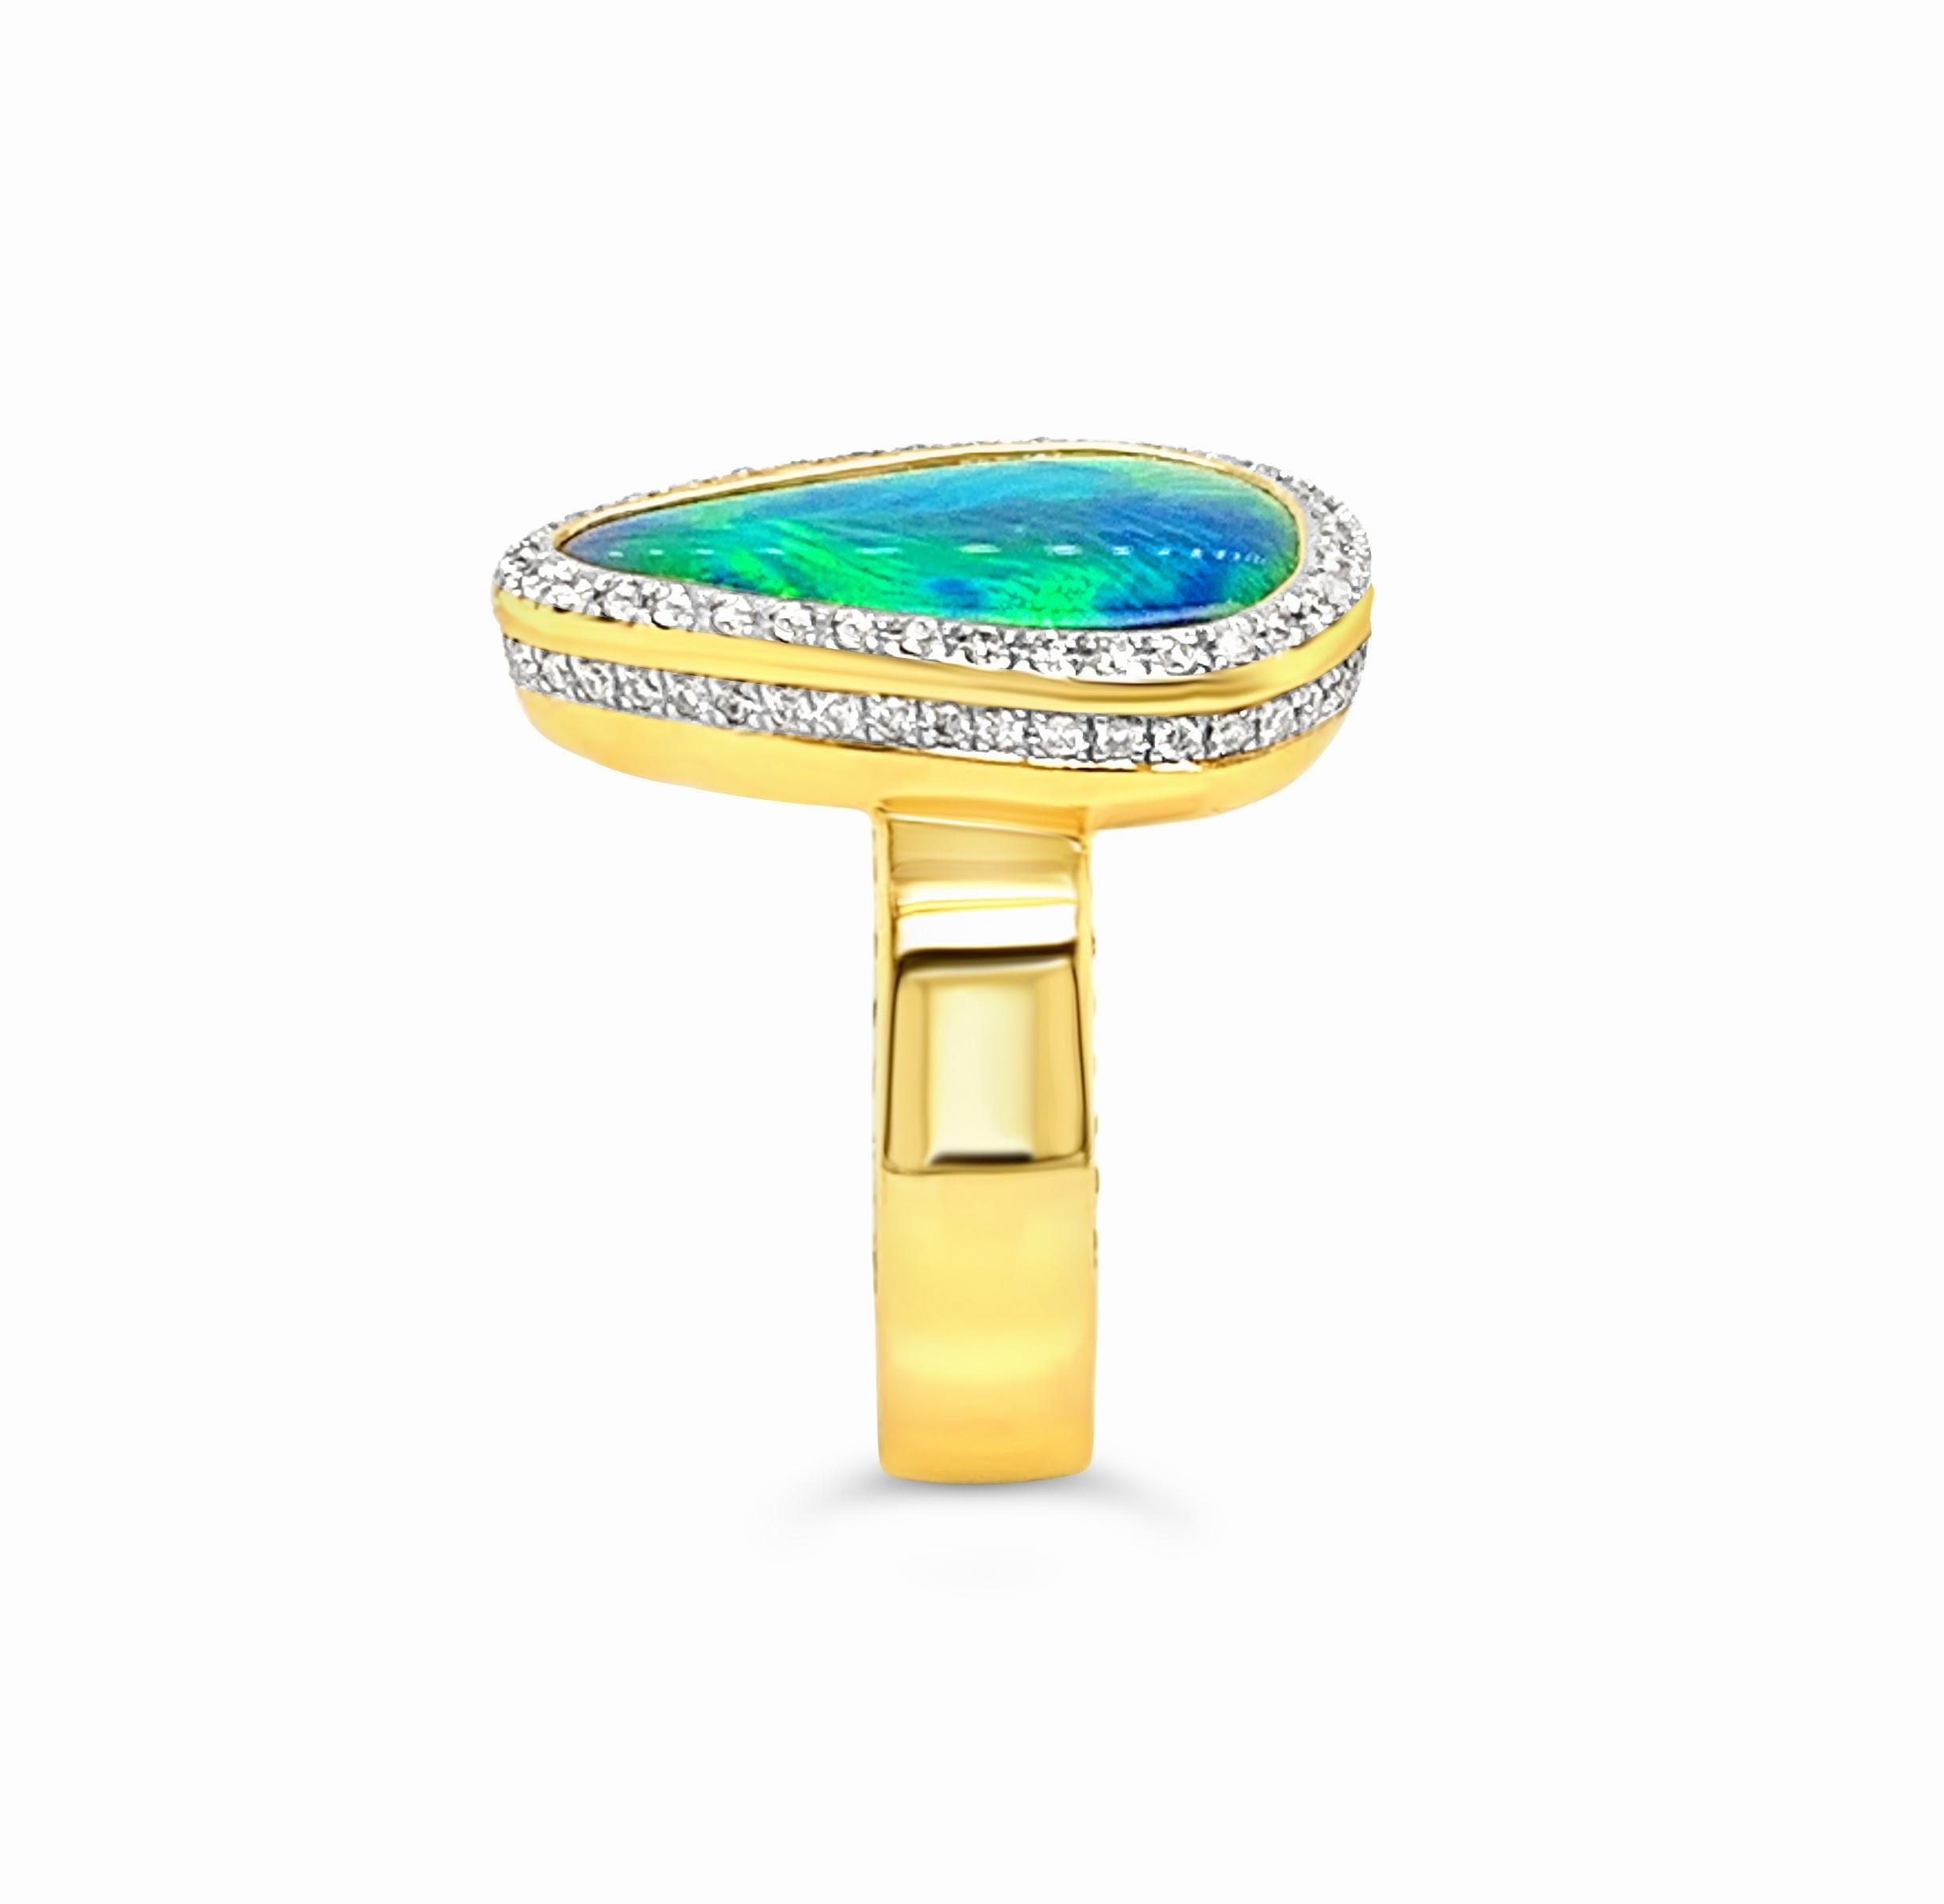 Women's Australian 5.03ct Black Opal and Diamond Cocktail Ring in 18K Yellow Gold